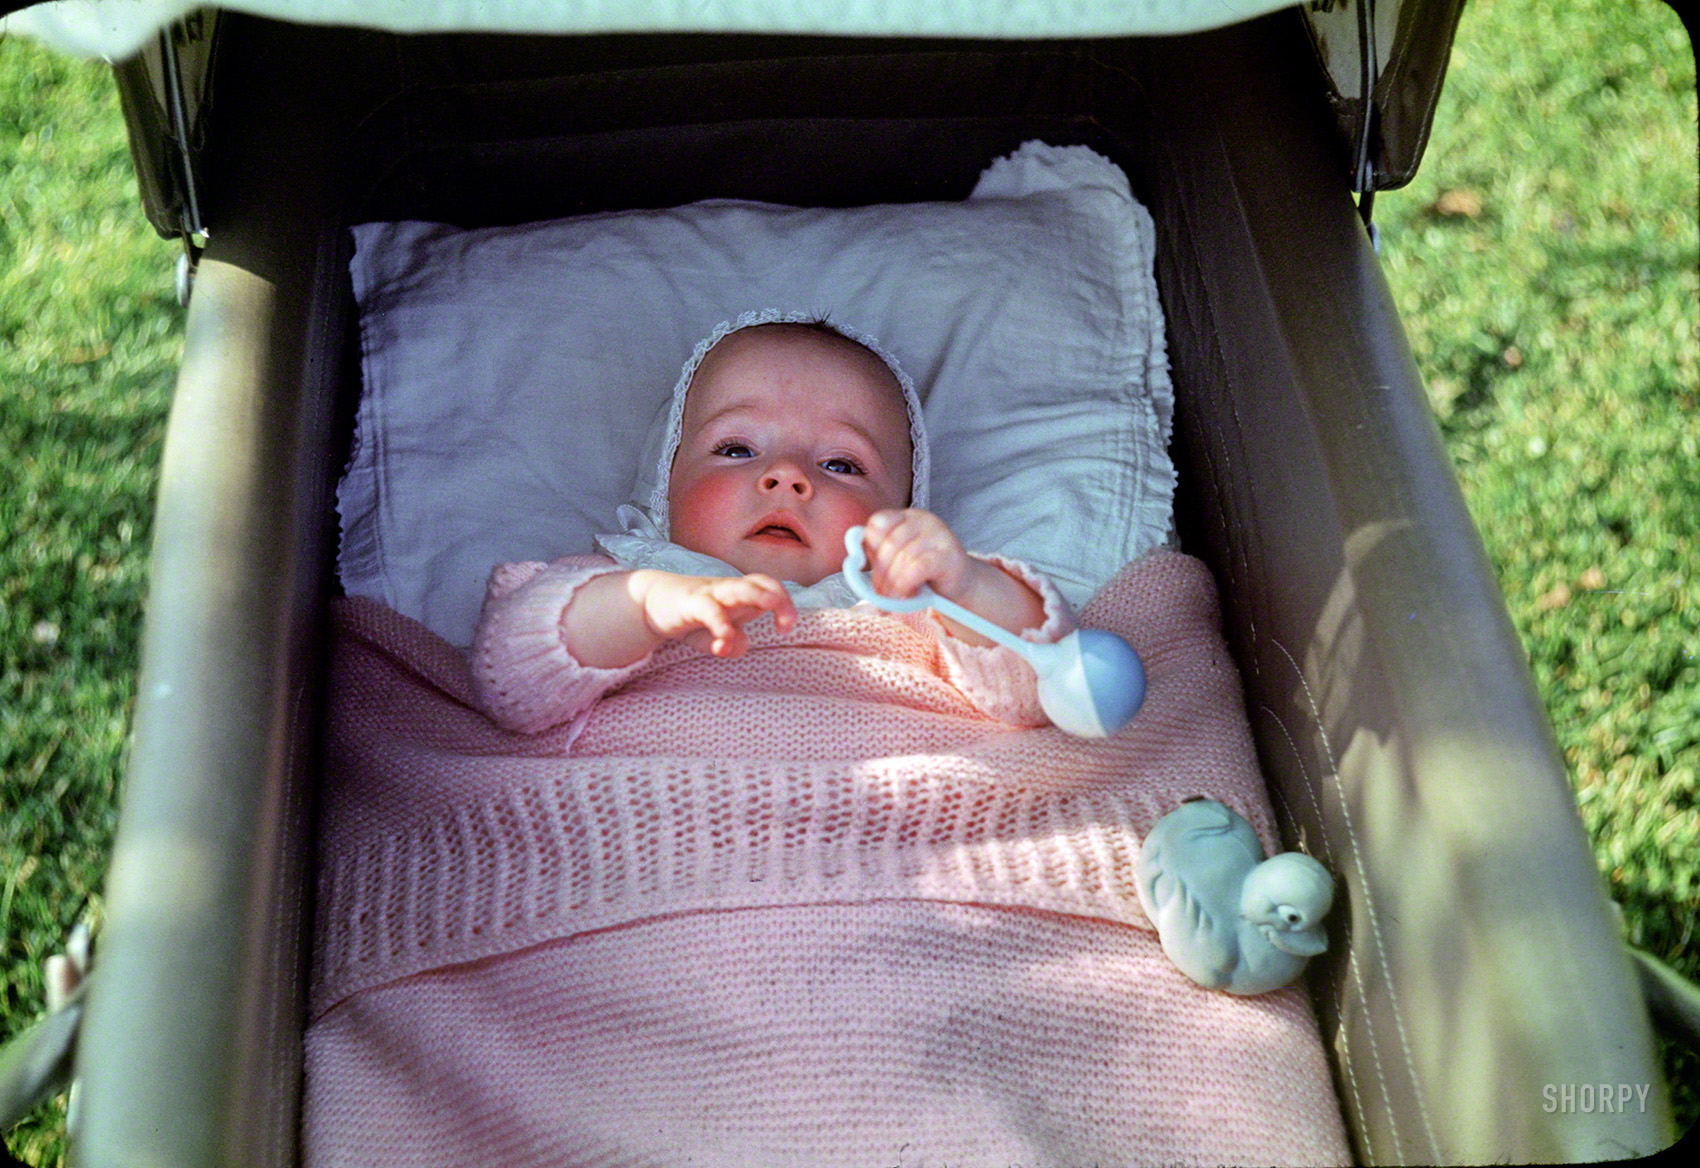 From the "Linda" Kodachromes, circa 1948, comes our latest look at the little lady, accessorized with rattle and ducky. 35mm color transparency. View full size.